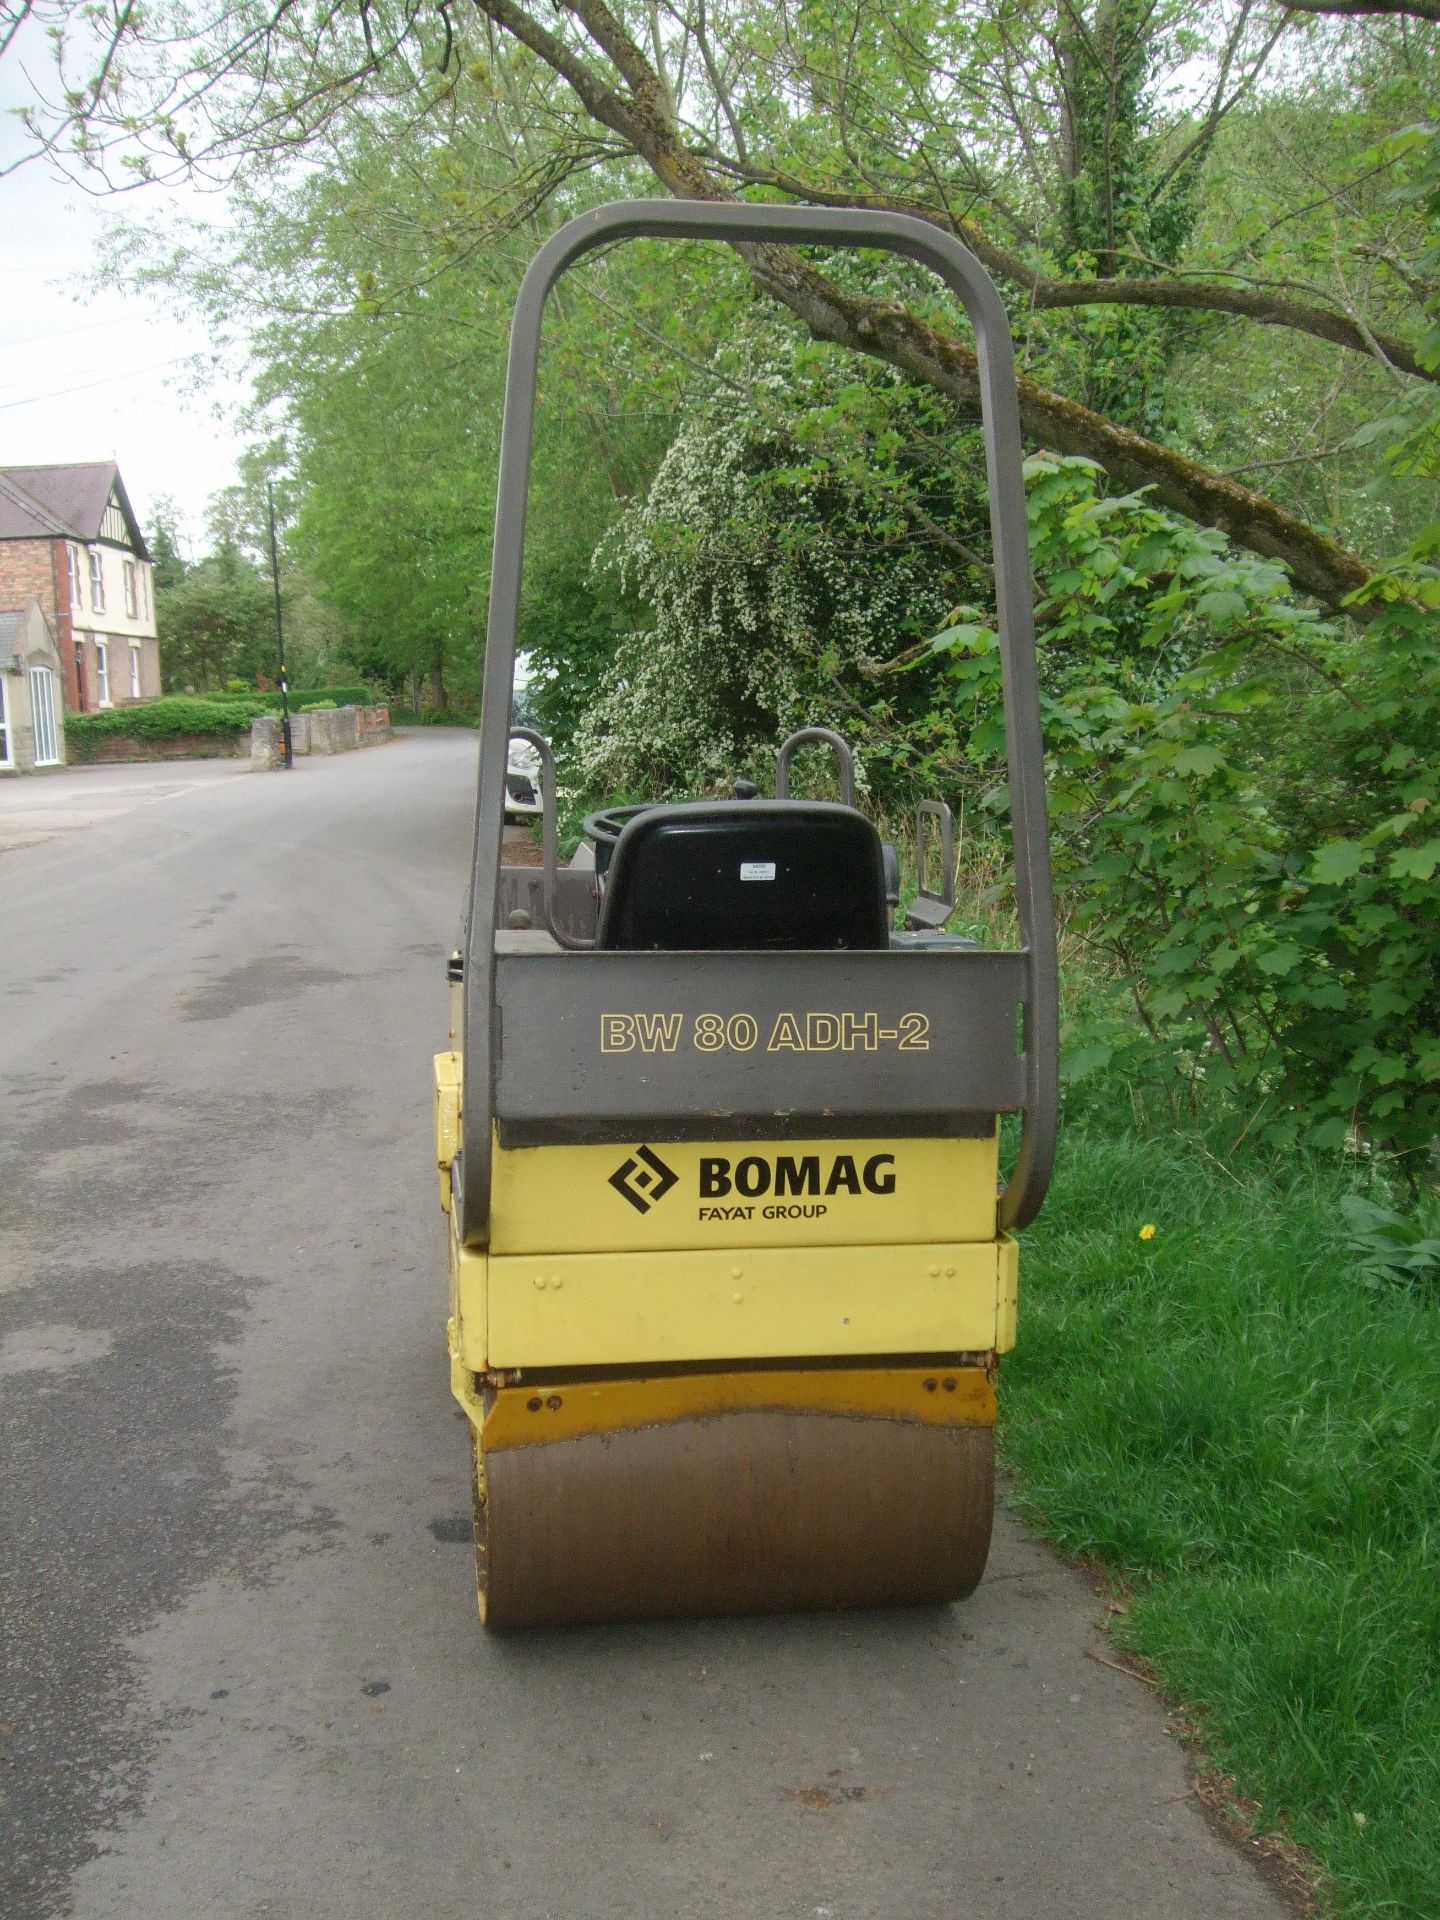 BOMAG BW80 ADH-2 ROLLER - 2628 RECORDED HOURS - NEW BATTTERY - Image 3 of 5